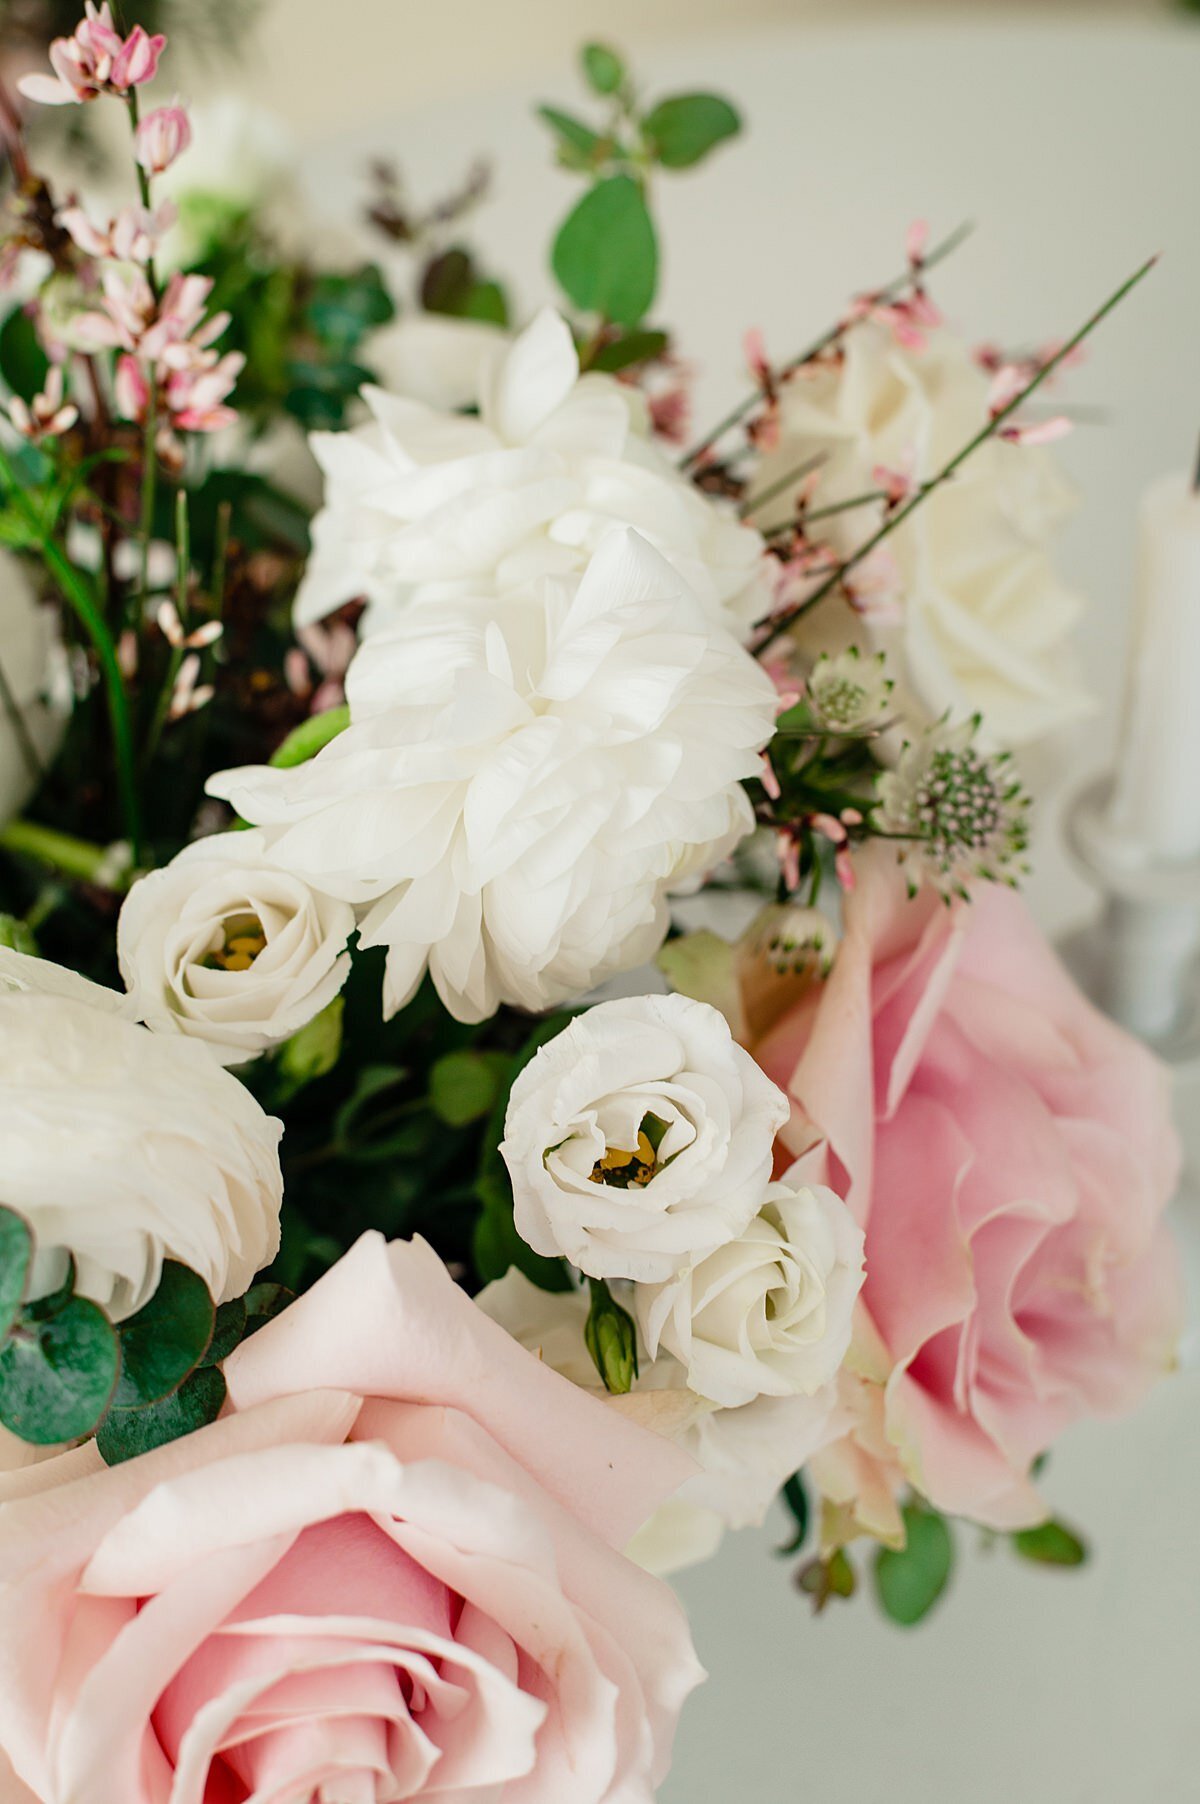 Centerpiece with pink and white roses